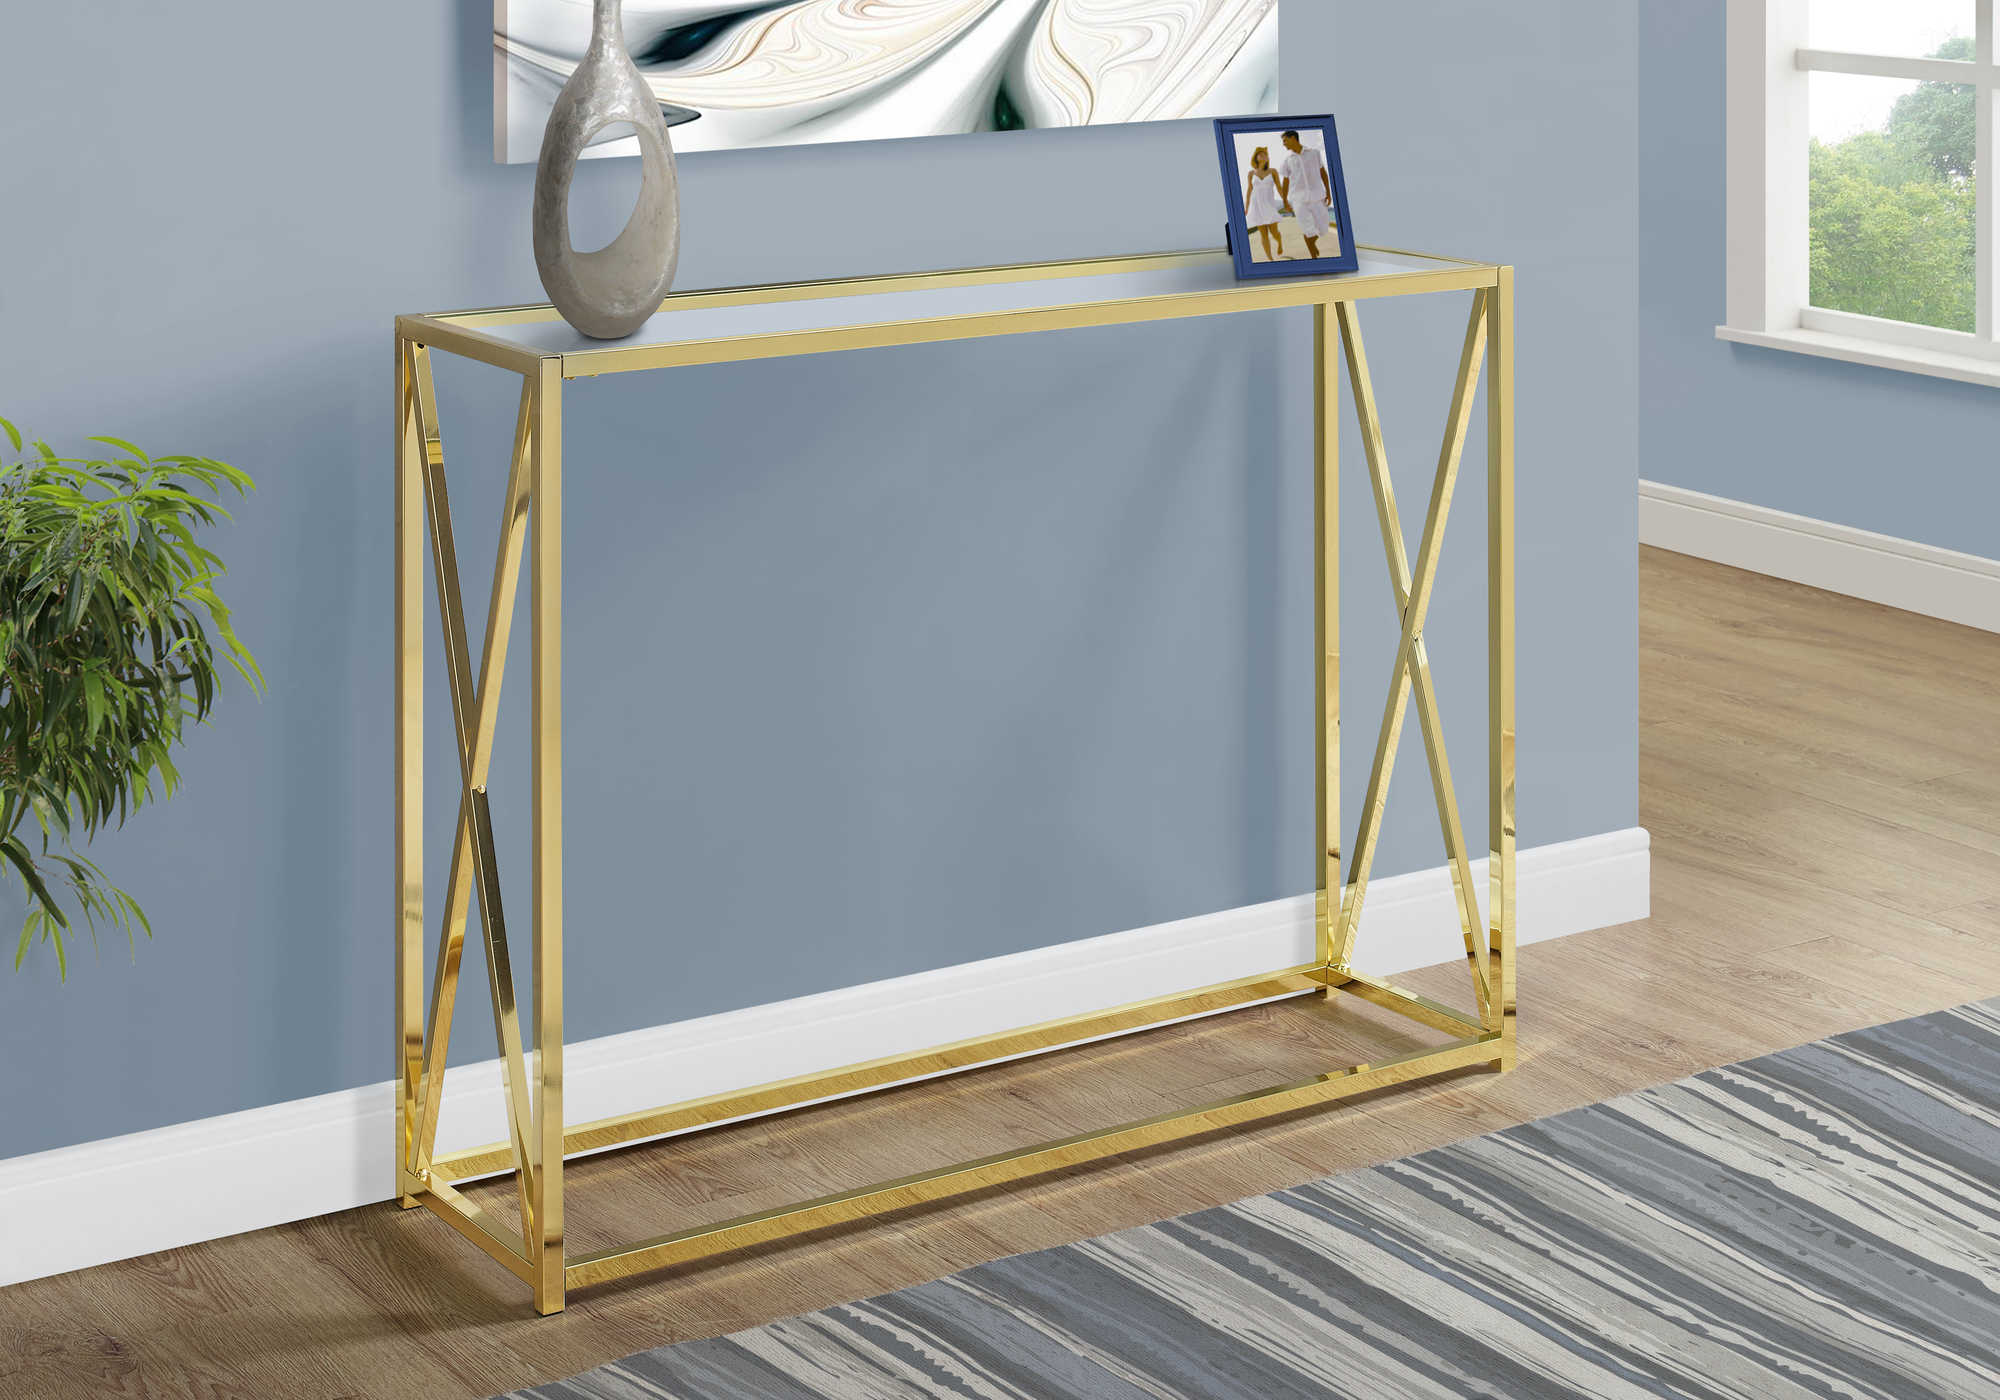 ACCENT TABLE - 42"L / GOLD METAL WITH TEMPERED GLASS 